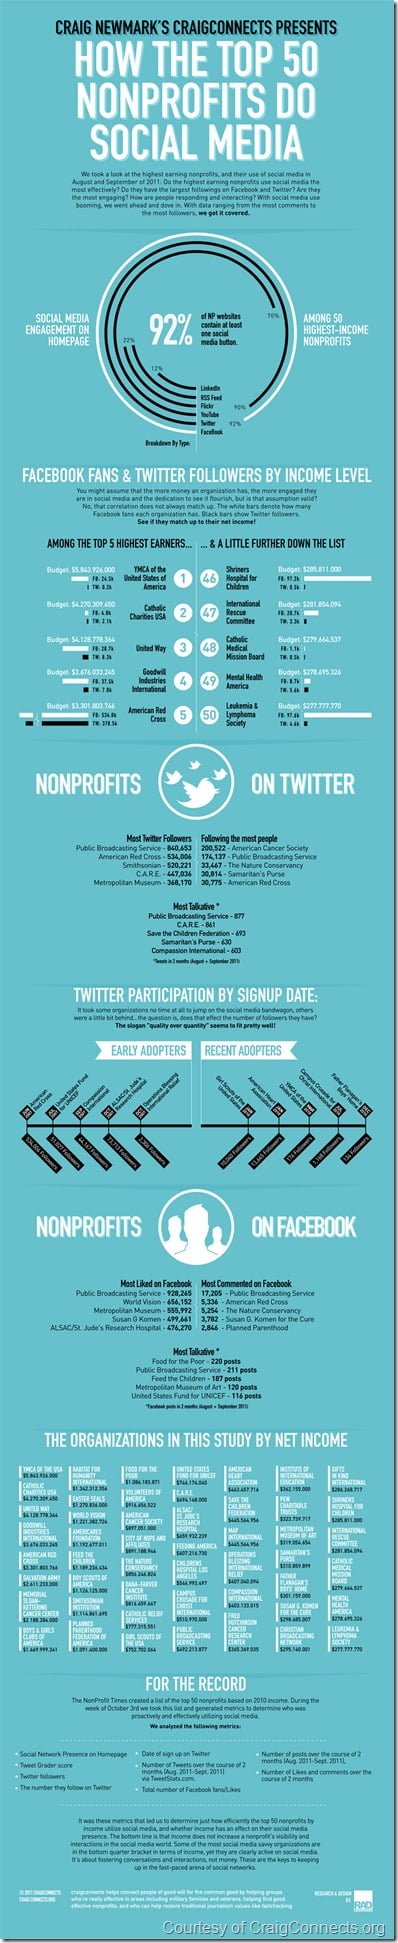 Infographic: Non Profits and Social Media